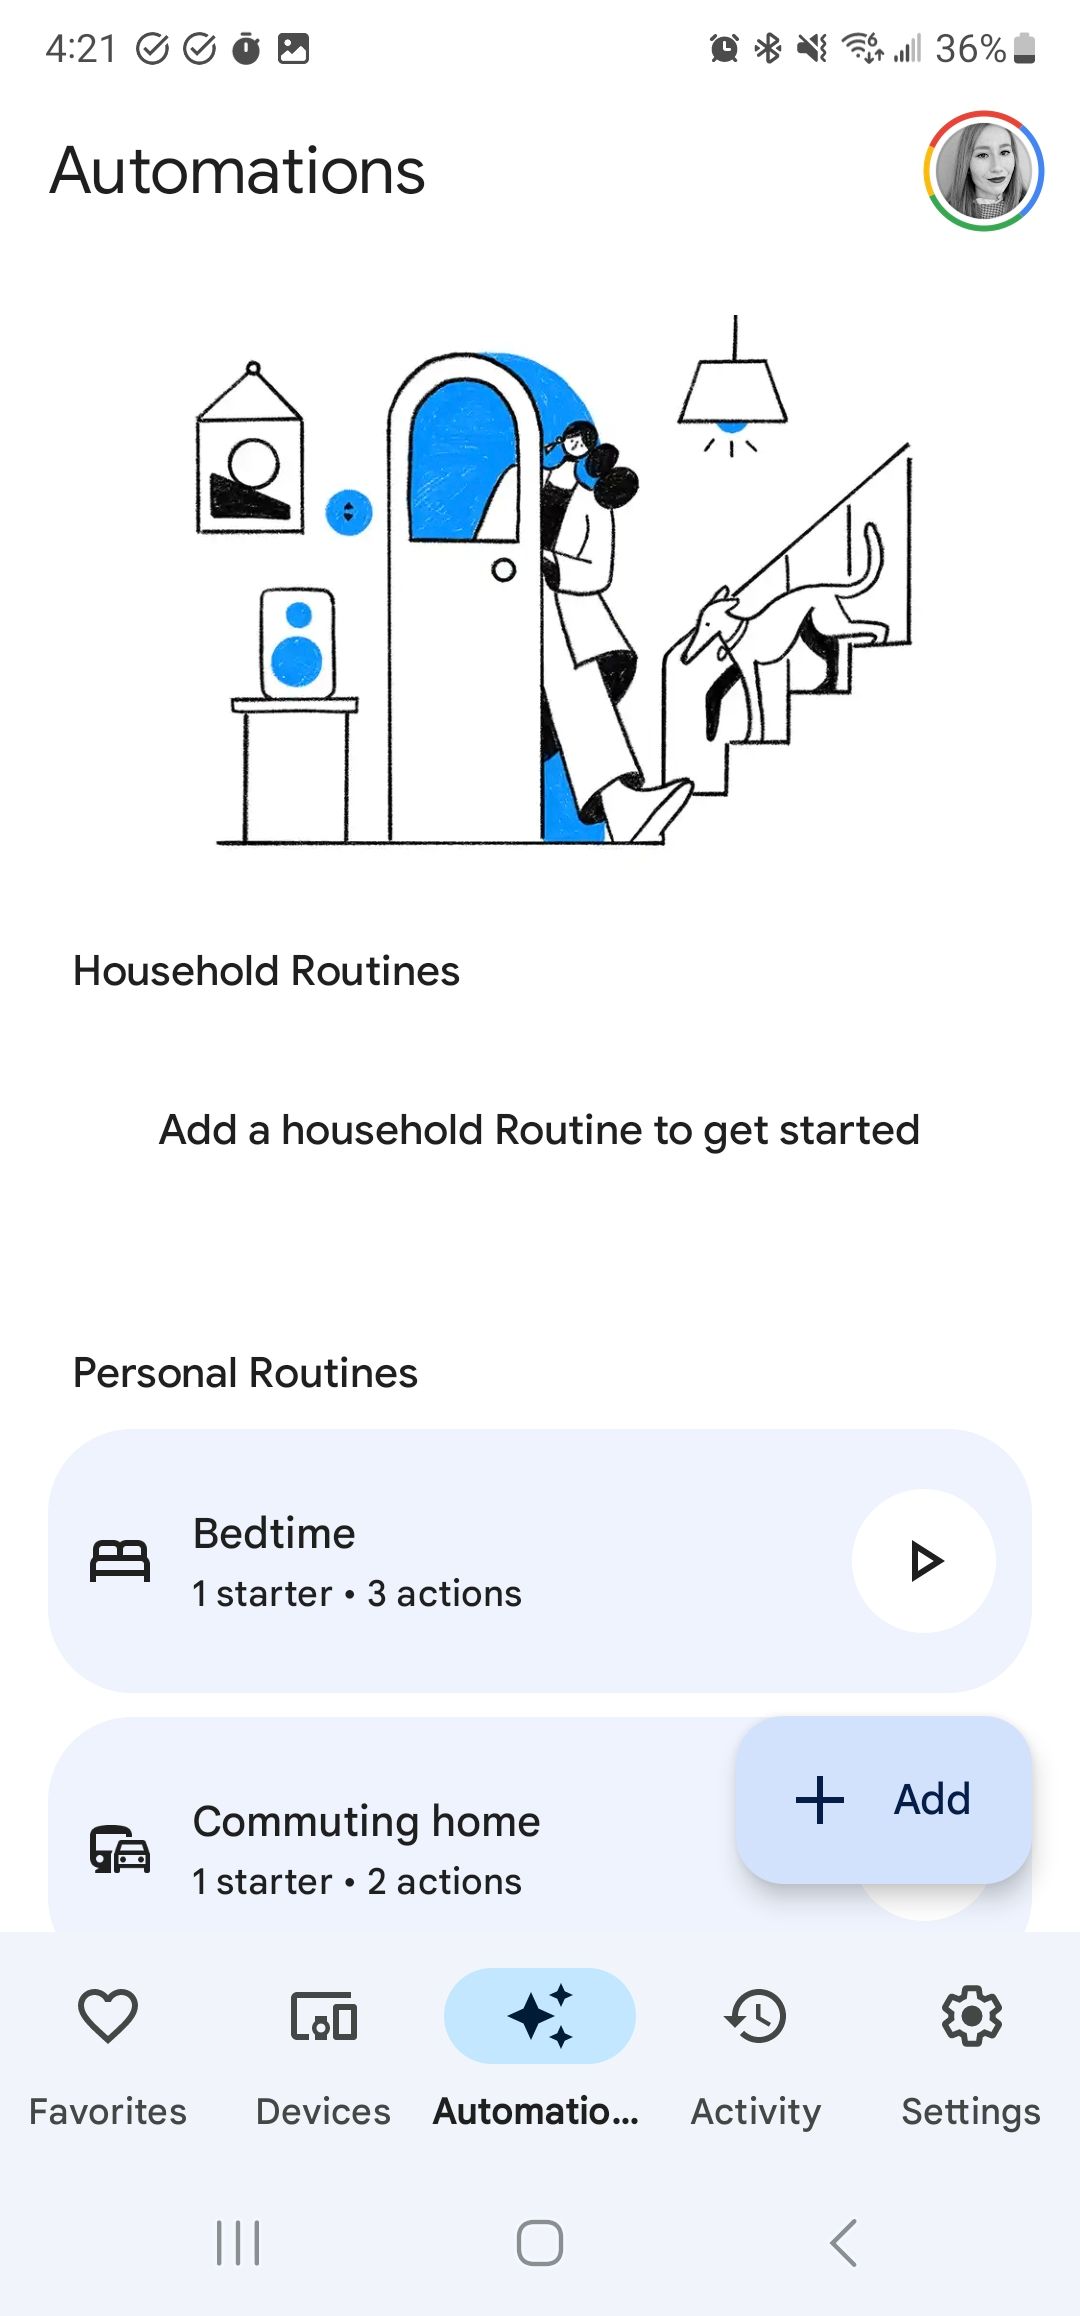 A screenshot of the Google Home app's Automations page, which lists routines.